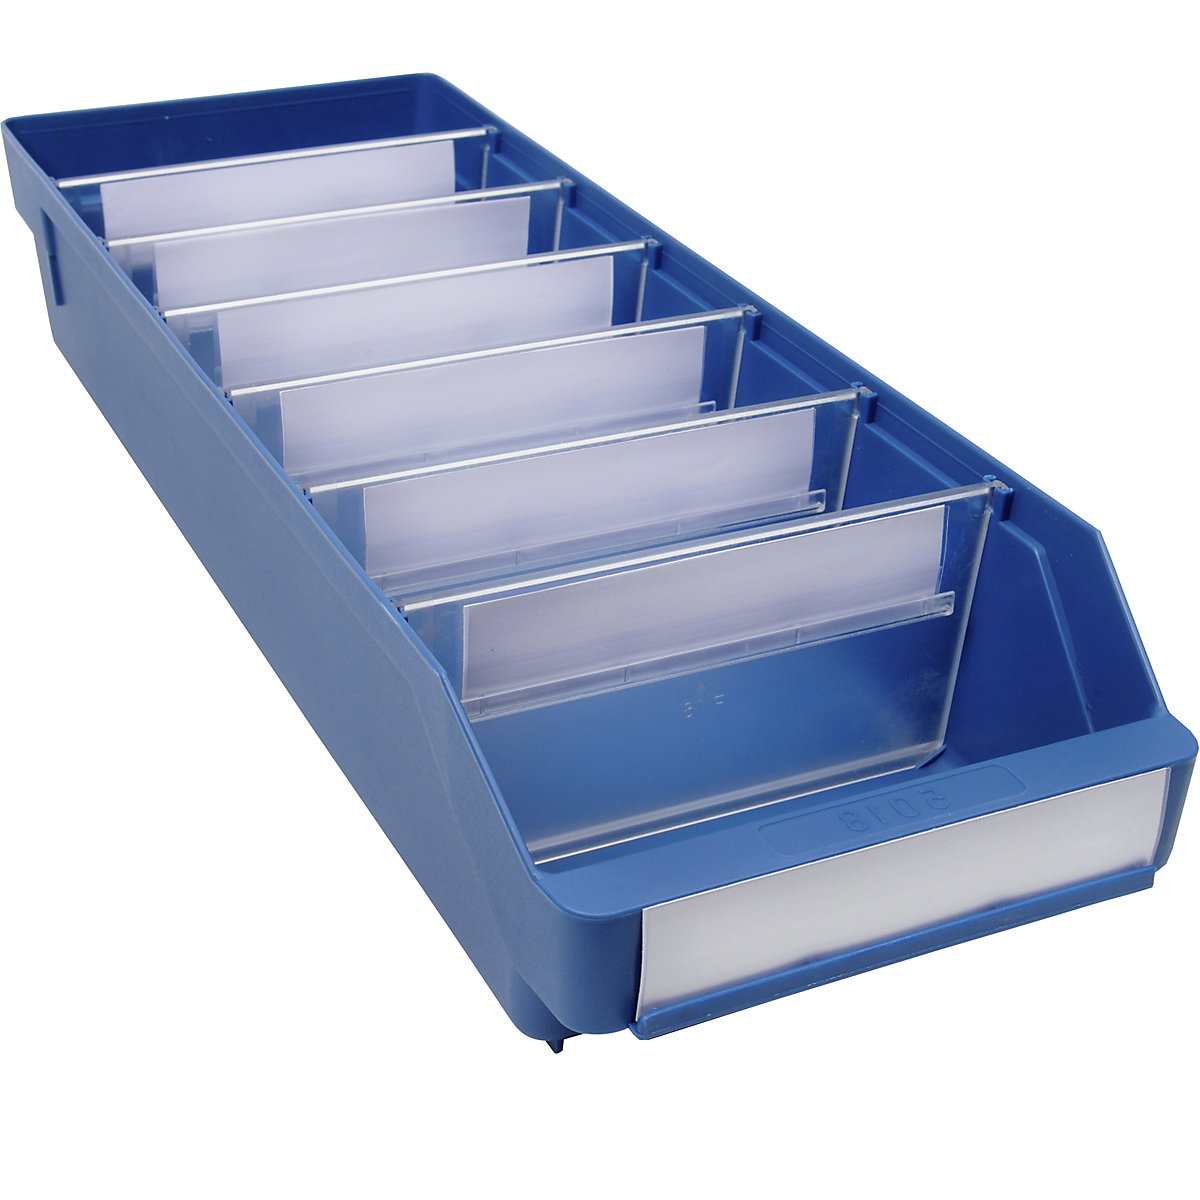 Shelf bin made of highly impact resistant polypropylene – STEMO, blue, LxWxH 500 x 180 x 95 mm, pack of 20-7